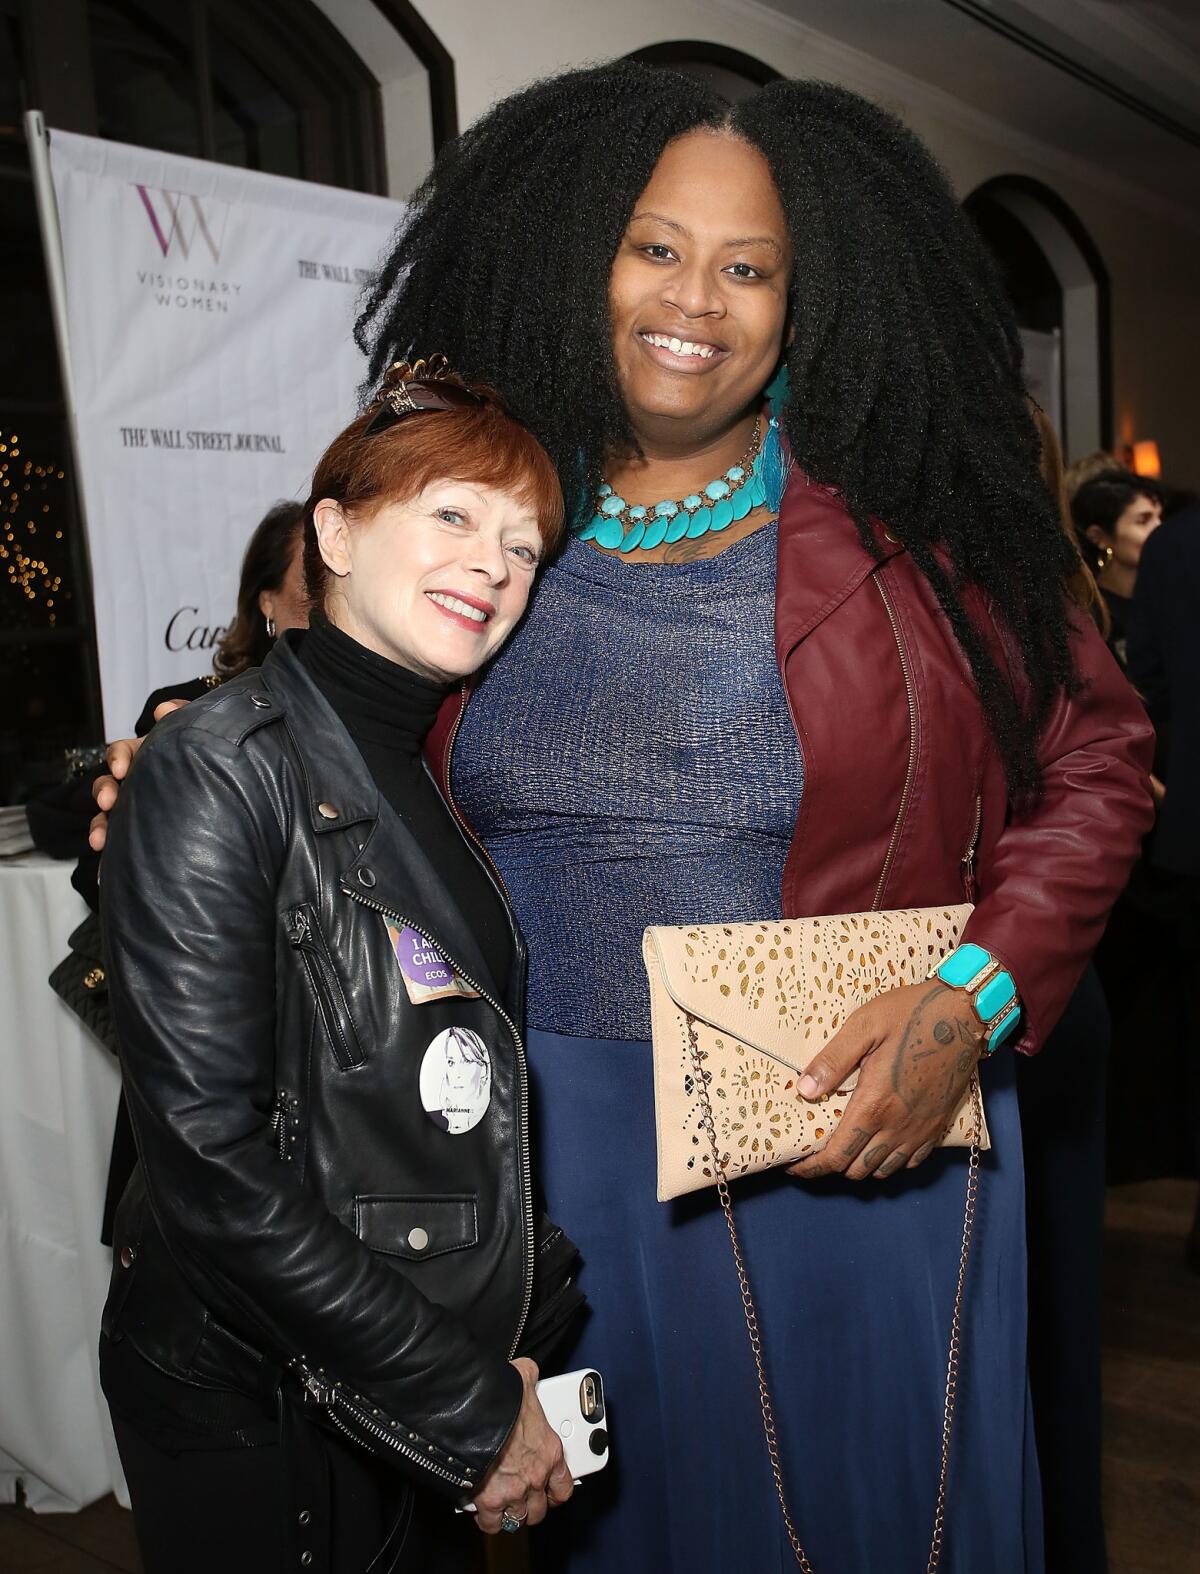 Frances Fisher, left, and Ashlee Marie Preston at Visionary Women's International Women's Day event.